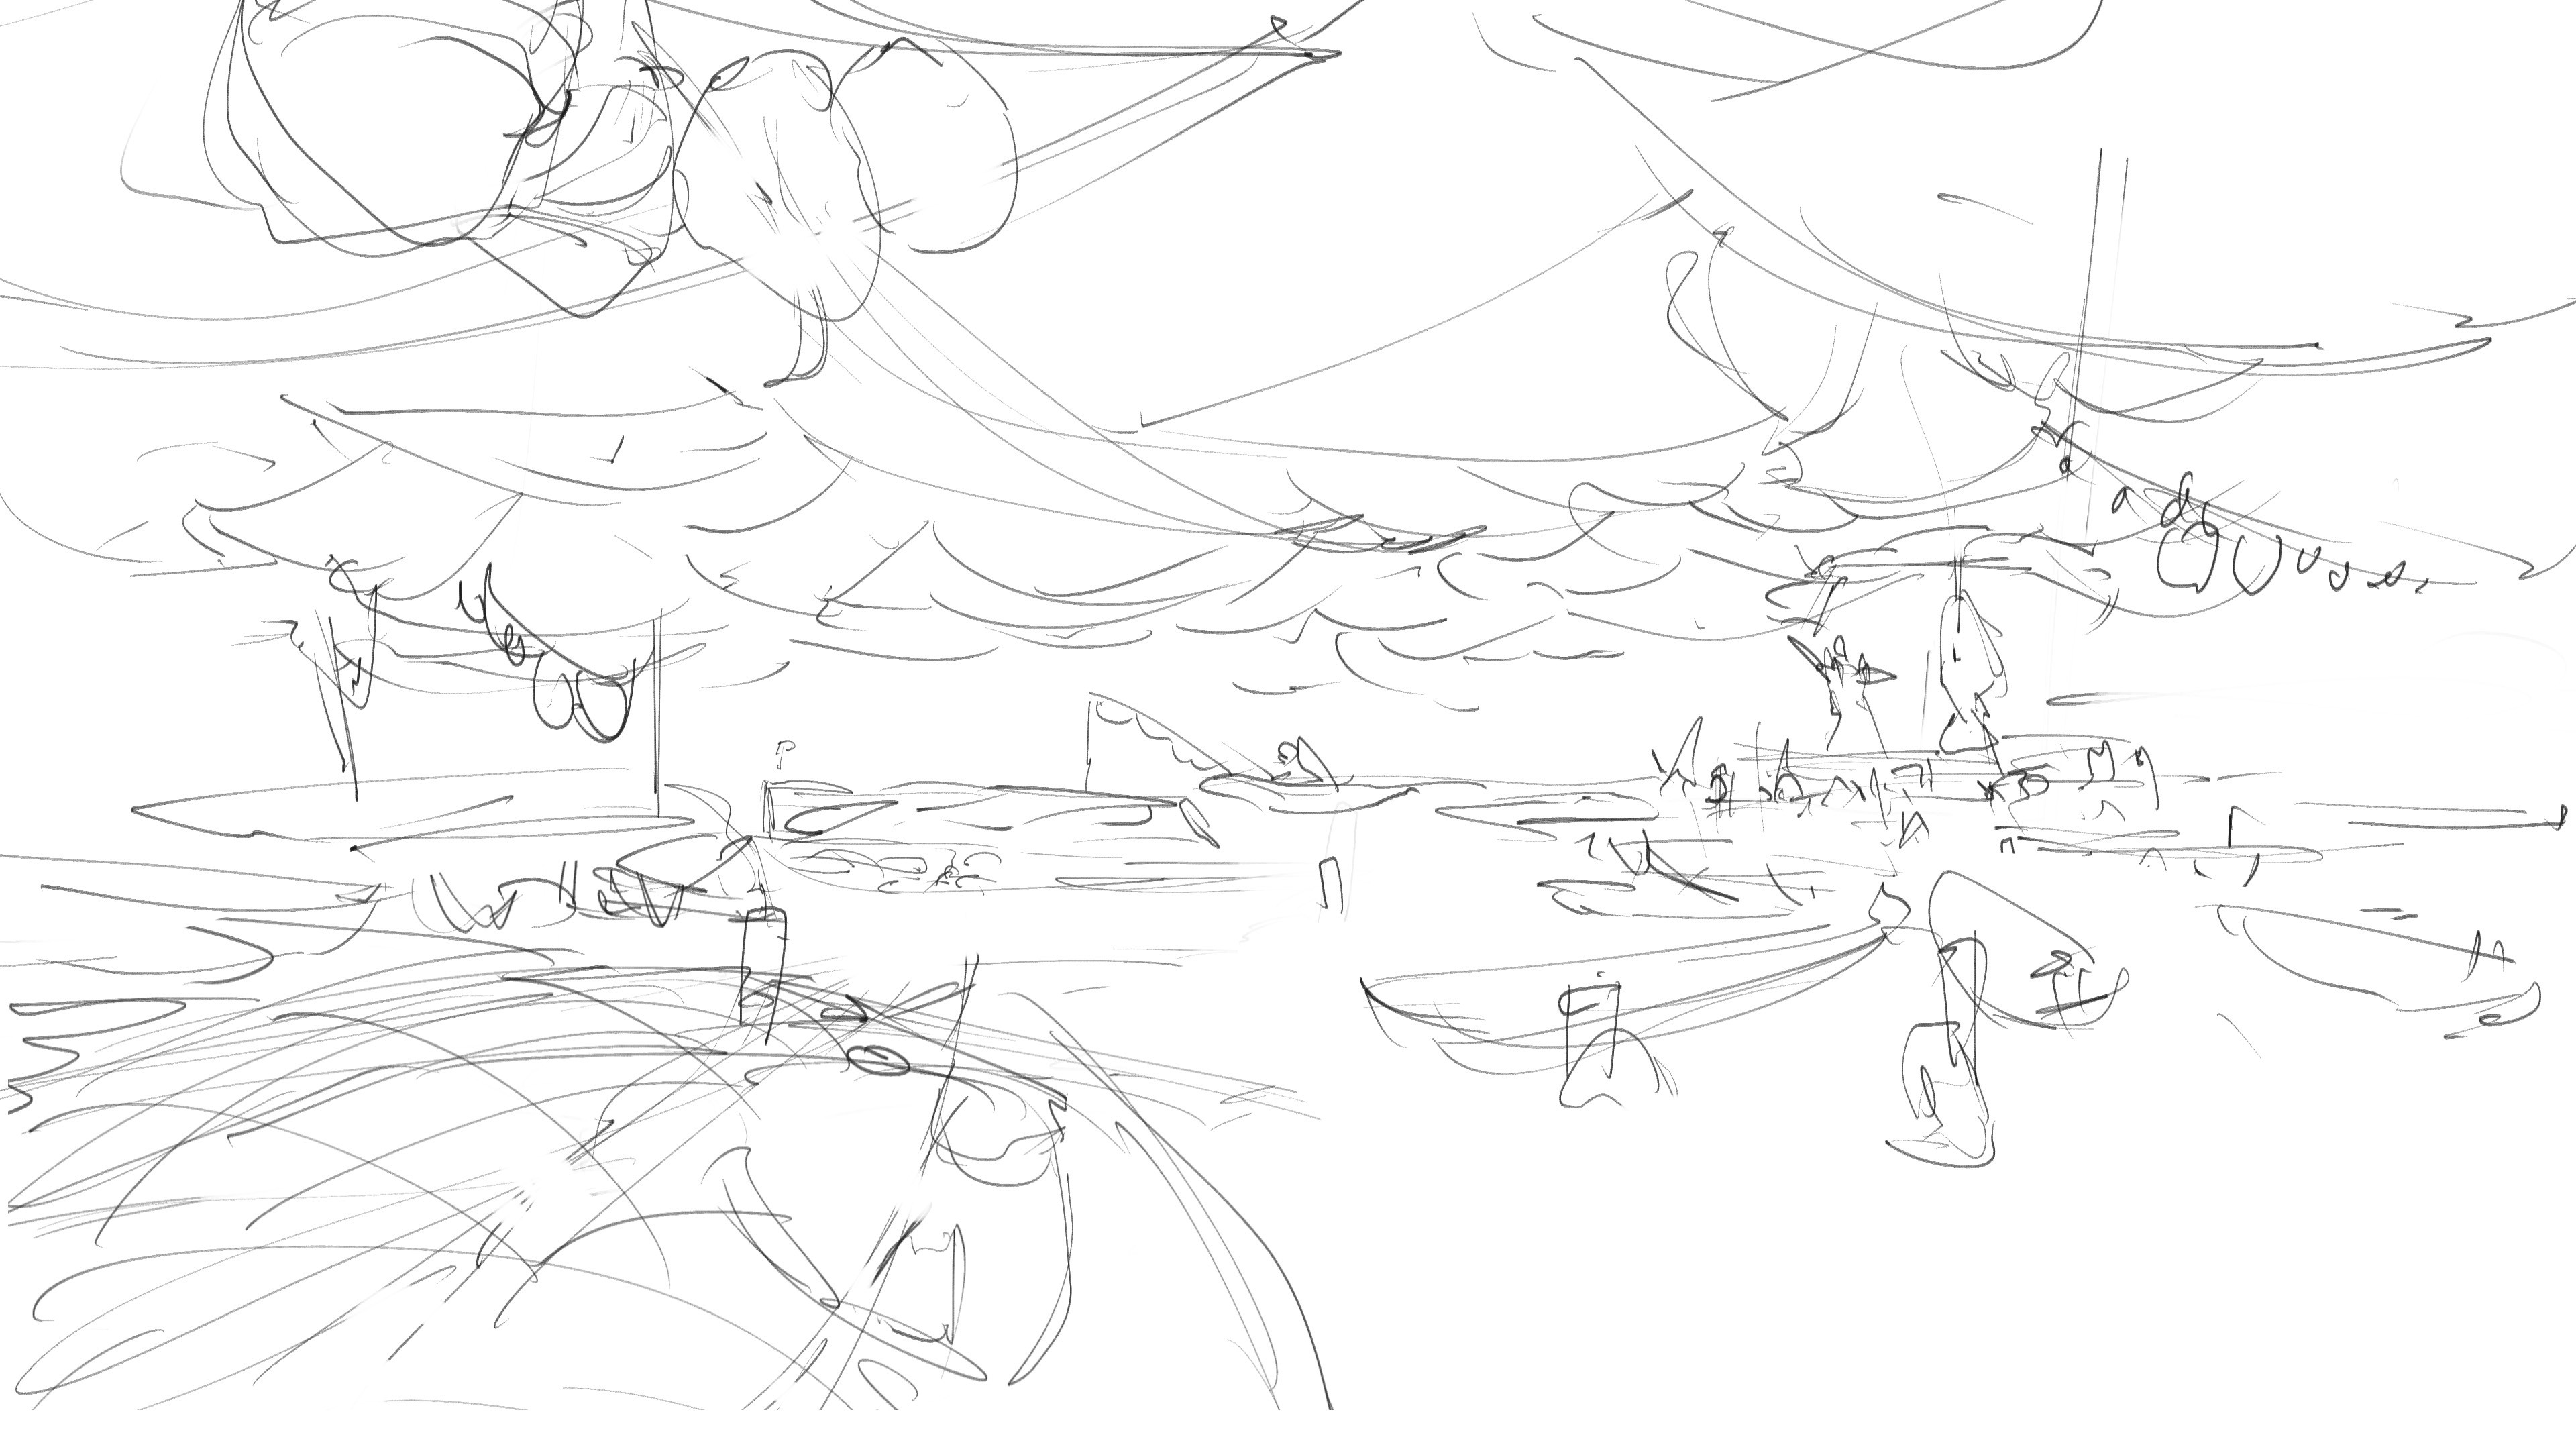 Sketch of the fish market. I had a clear idea from the start. Inspired by asian floating markets.